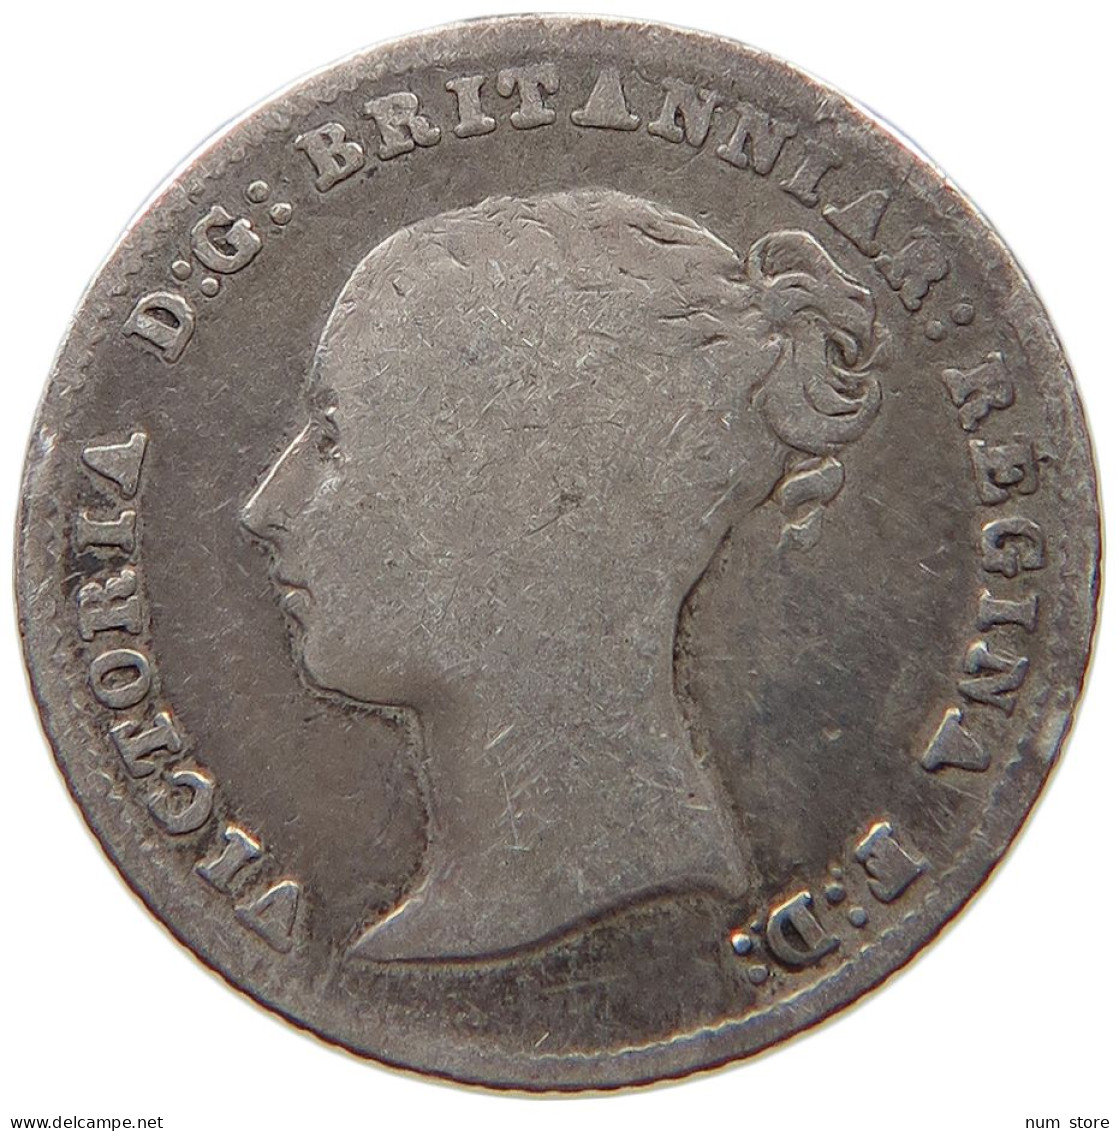 GREAT BRITAIN FOURPENCE 1843 Victoria 1837-1901 #t082 0051 - G. 4 Pence/ Groat